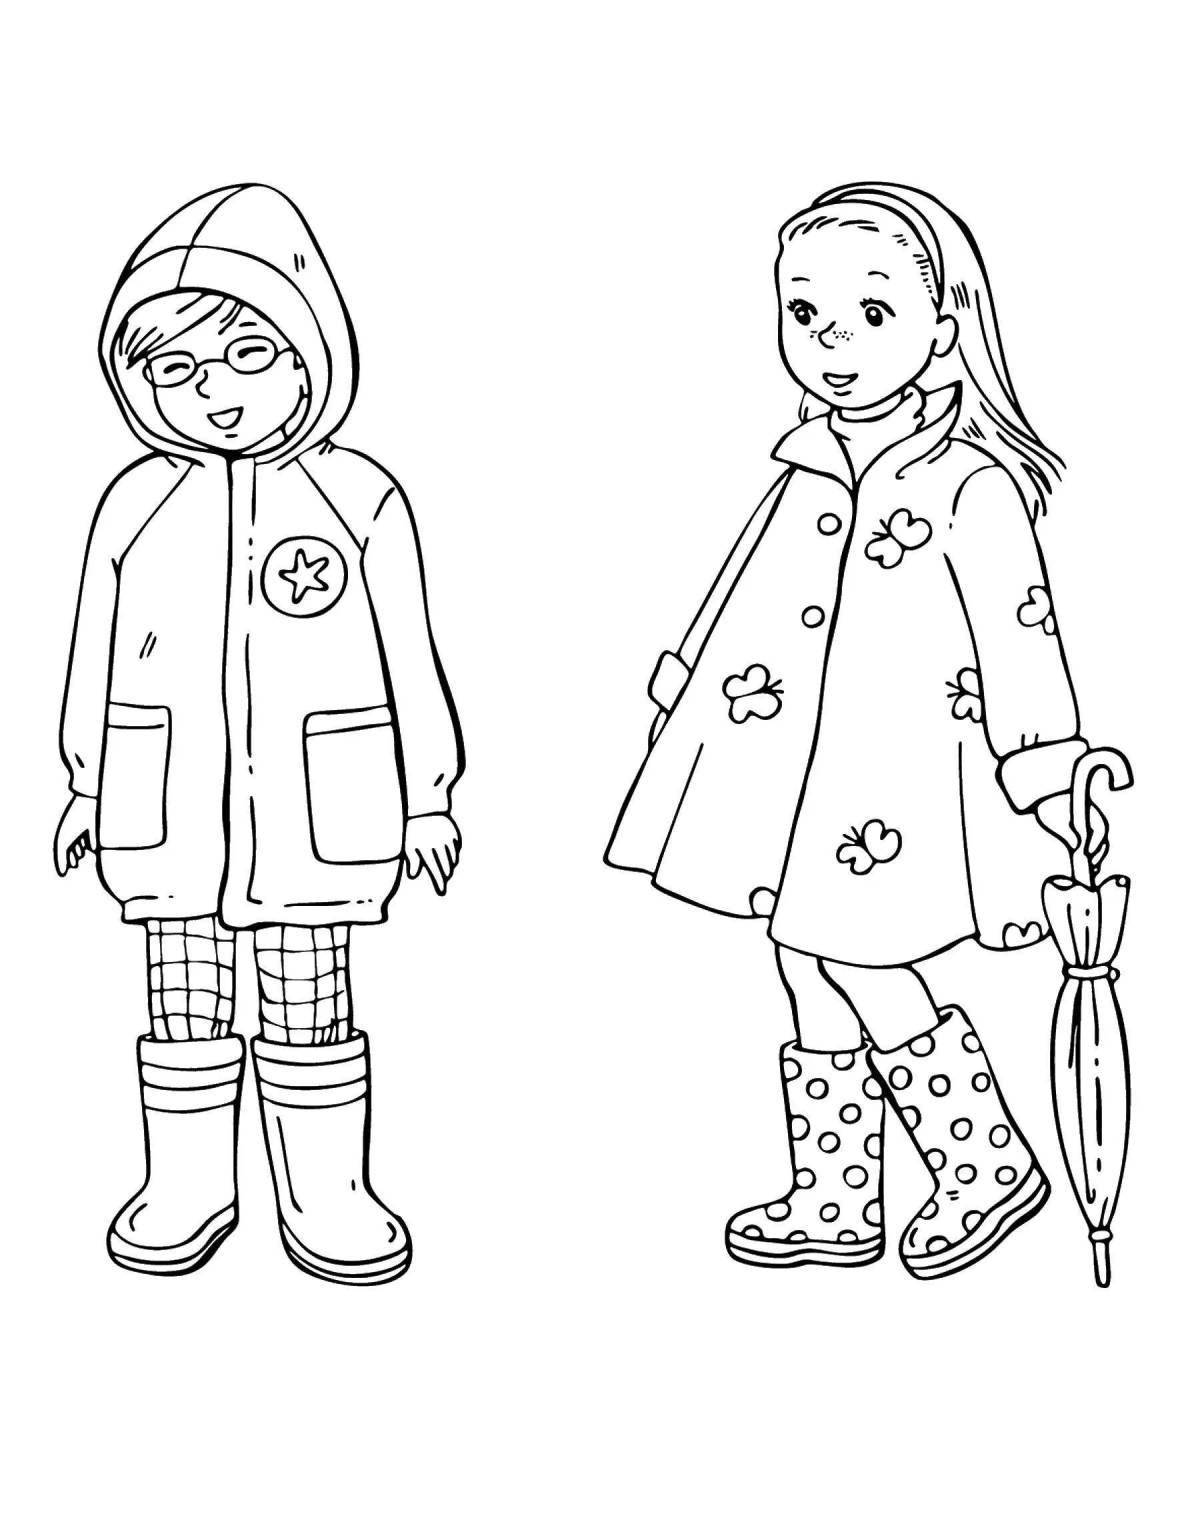 A fascinating coloring book of people in clothes